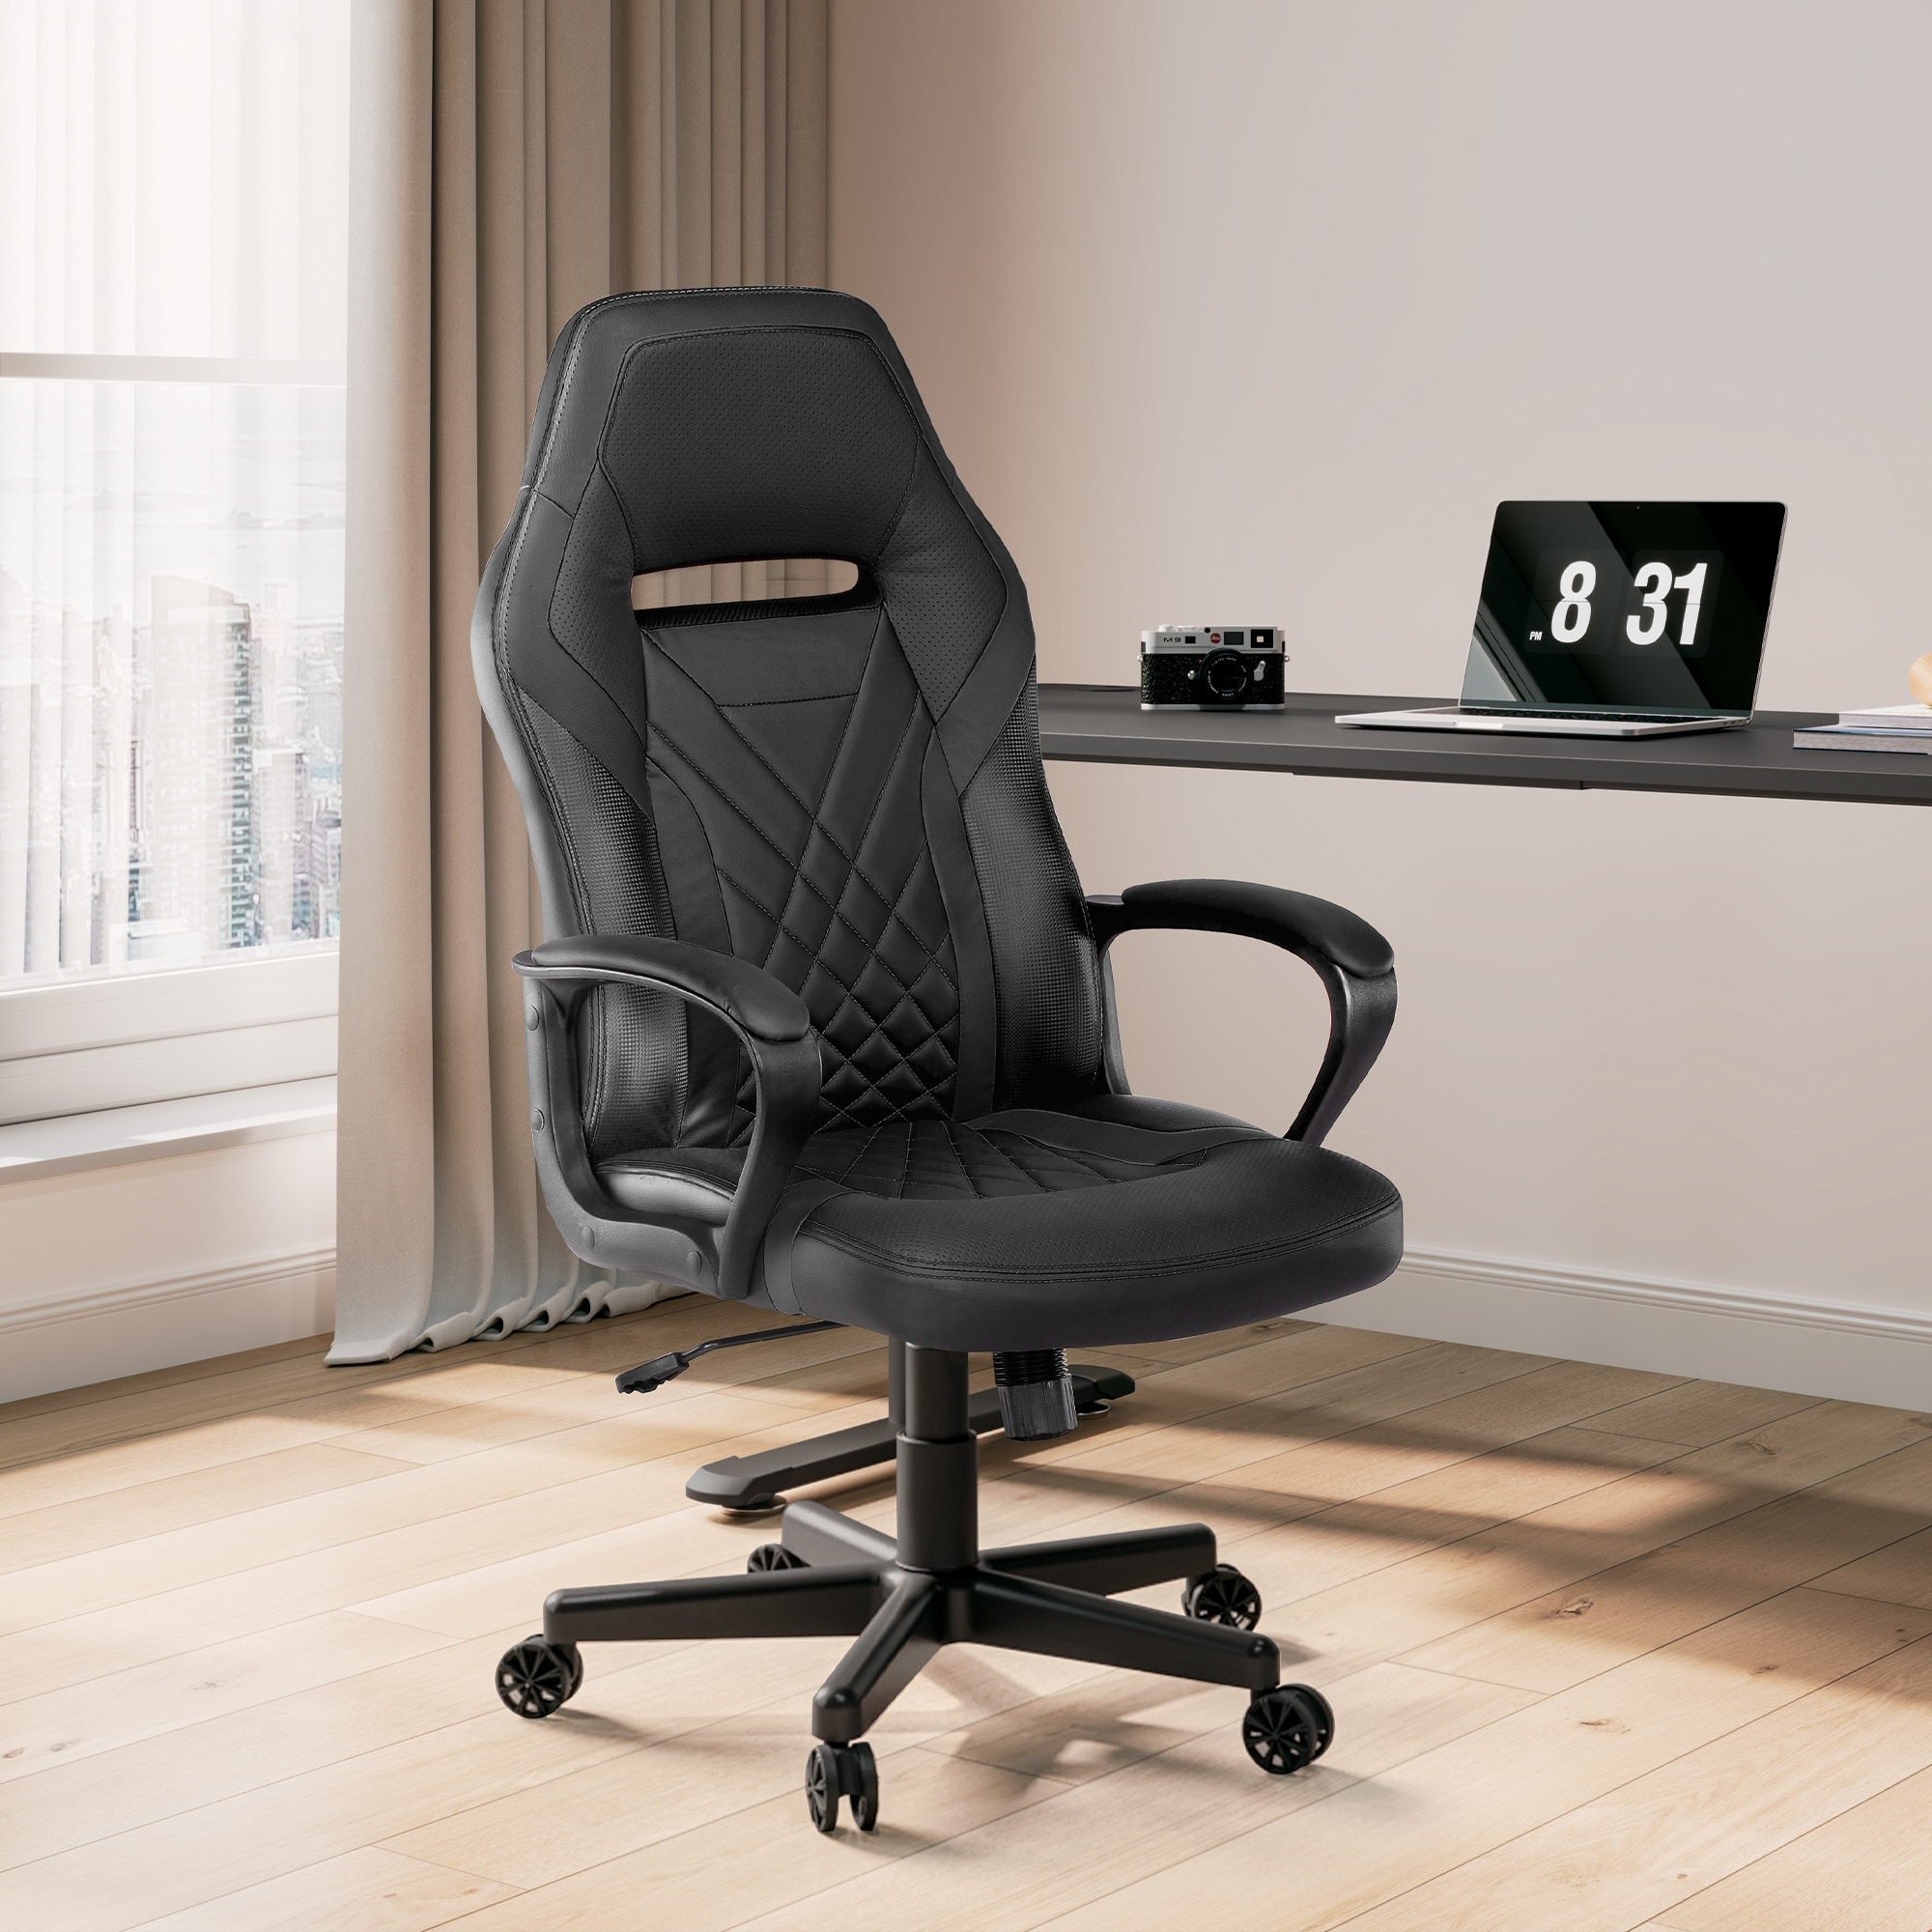 EUREKA ERGONOMIC Ergonomic Office Chair, Comfortable Office Chair with  Lumbar Support, Breathable Mesh Chair with Adjustable Height, Home Office  Desk